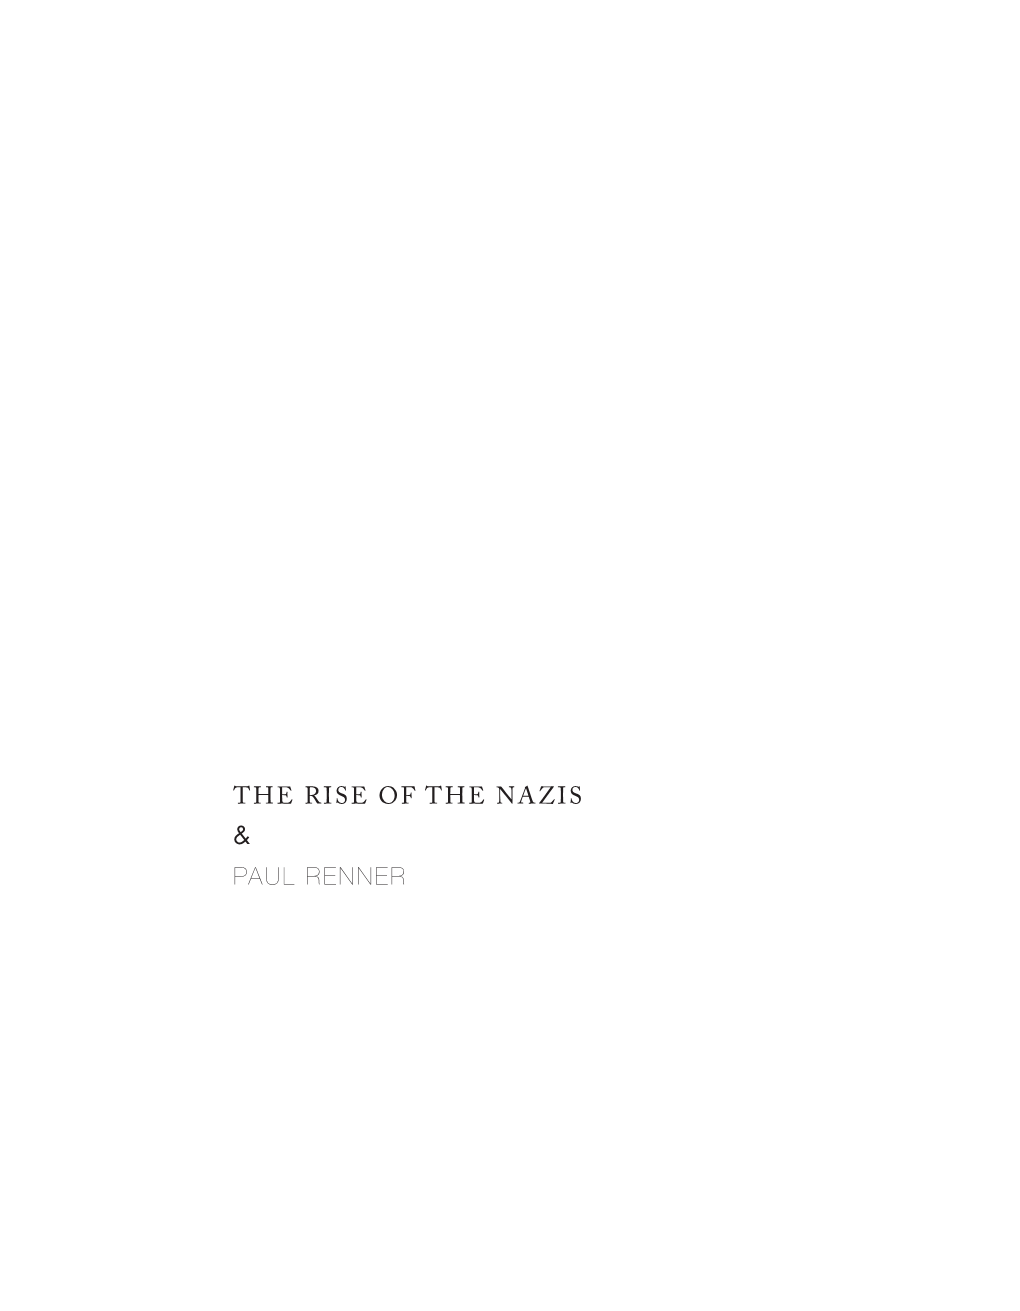 The Rise of the Nazis & Paul Renner